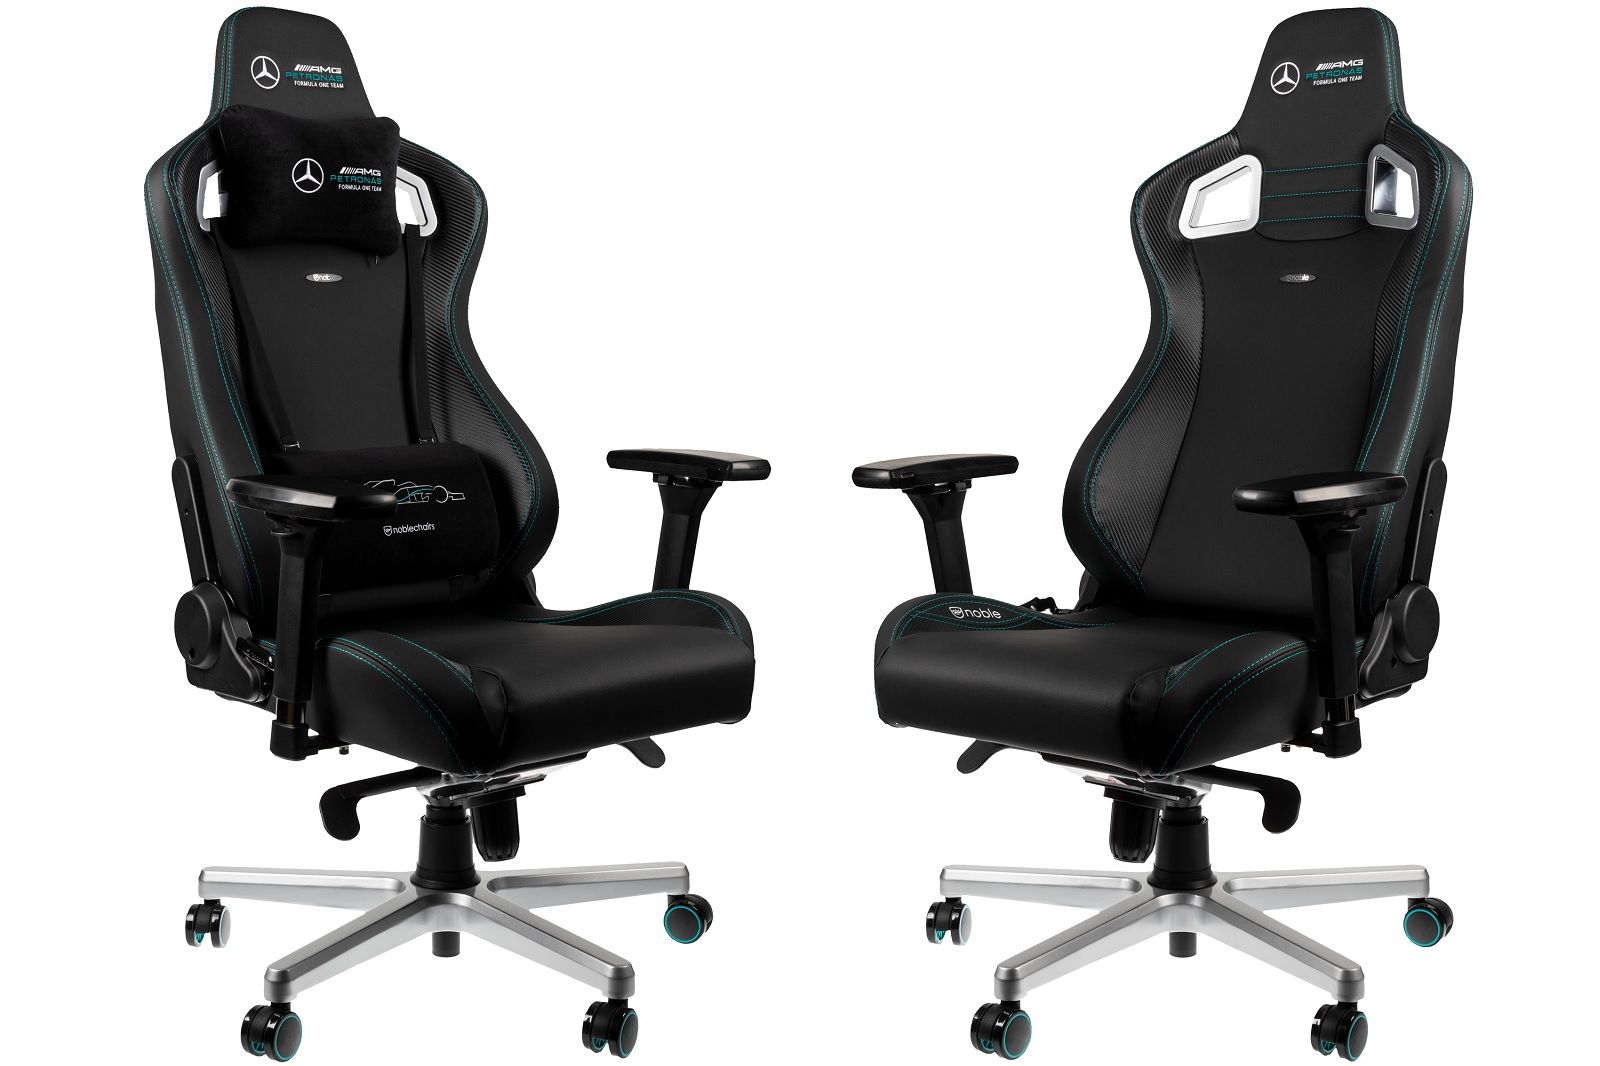 Noblechairs and Mercedes-AMG have teamed up to create an officially licenced F1 gaming chair photo 1